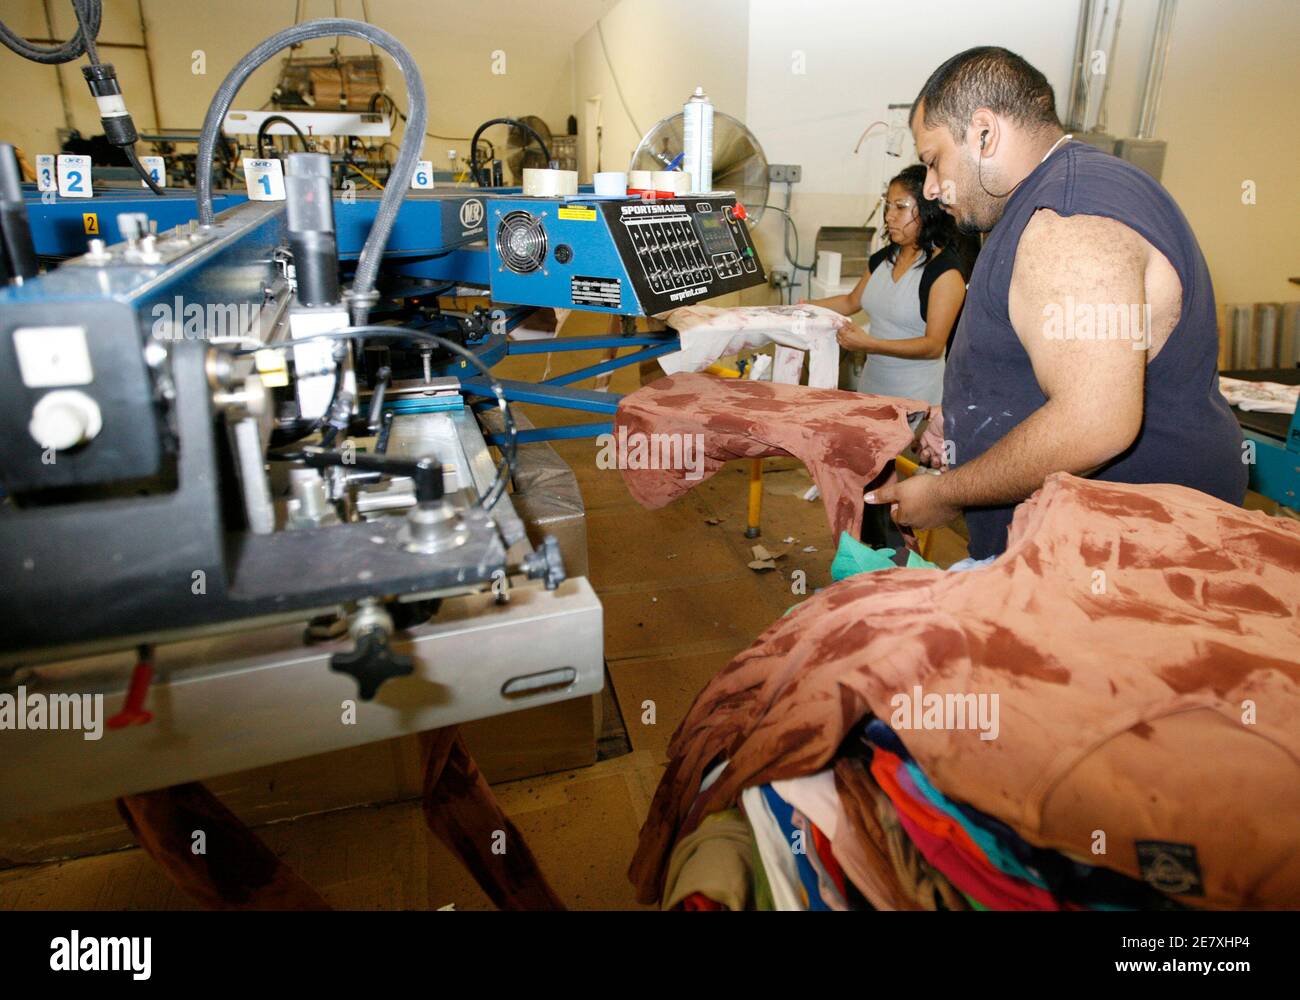 Workers feed women's t-shirts onto a machine which prints designs on the shirts at the Sledge USA clothing factory in Los Angeles October 13, 2009  U.S. store chains are hedging a major bet they made this year by slashing inventories, sometimes as much as 25 percent, to make sure they do not get stuck with a glut of merchandise for a second consecutive year.  To match feature RETAIL-HOLIDAYSALES-INVENTORY/   REUTERS/Fred Prouser   (UNITED STATES BUSINESS) Stock Photo